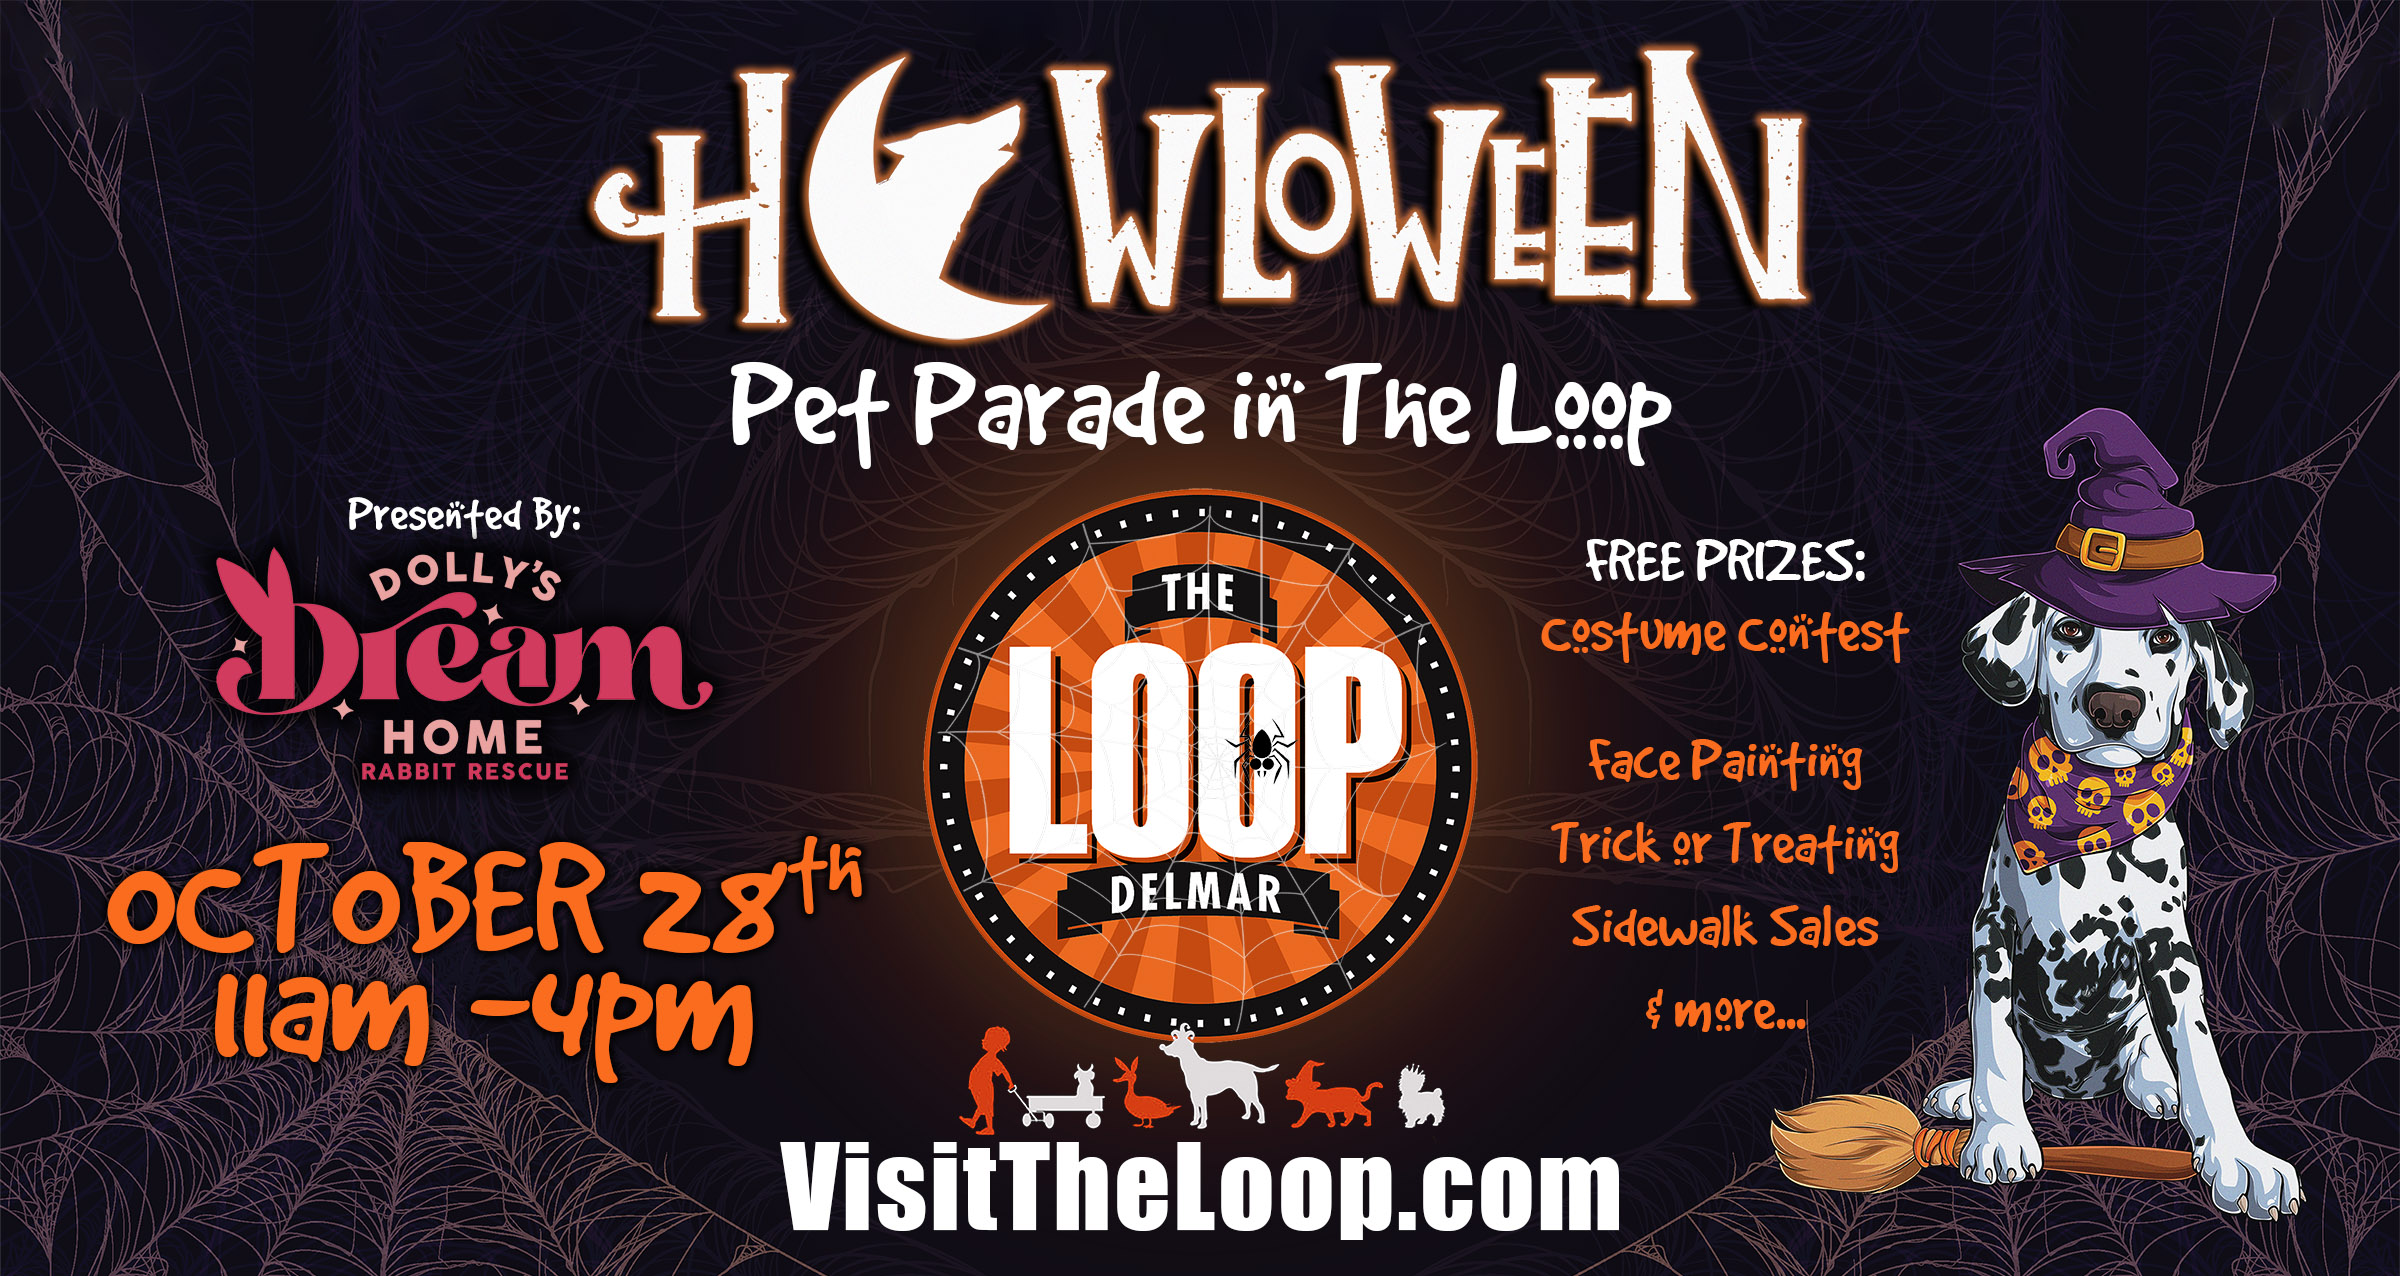 Howloween Pet Parade and Costume Contest in the Delmar Loop